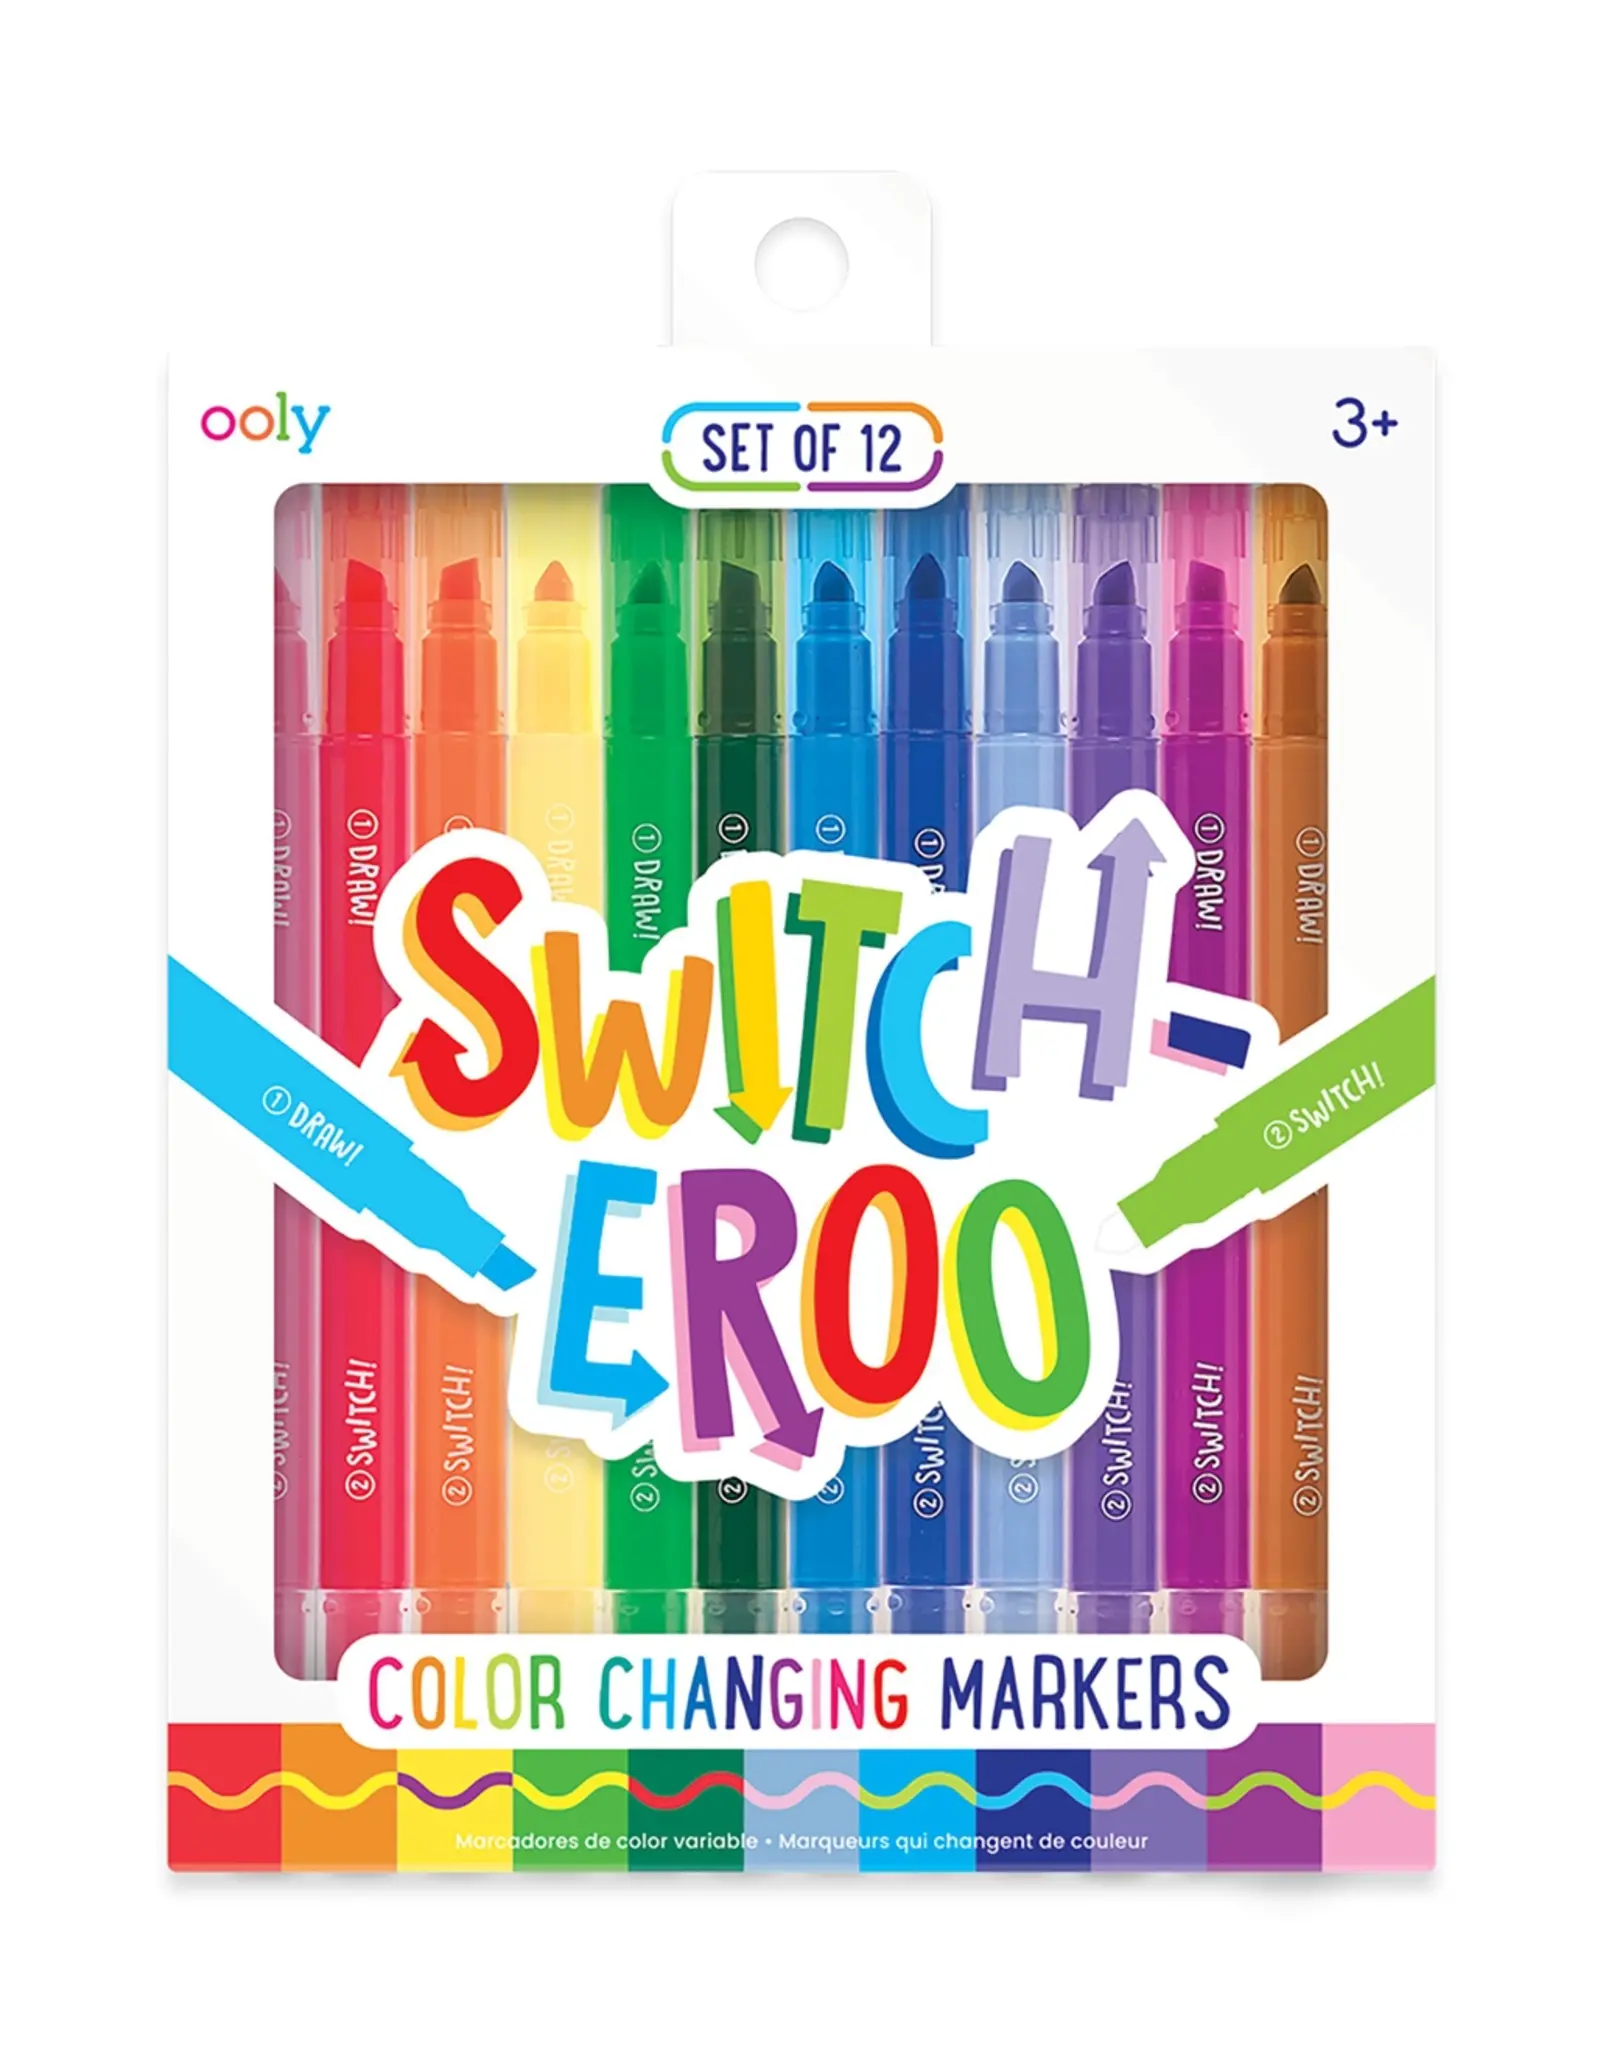 OOLY Switch-Eroo! Color-Changing Markers 2.0